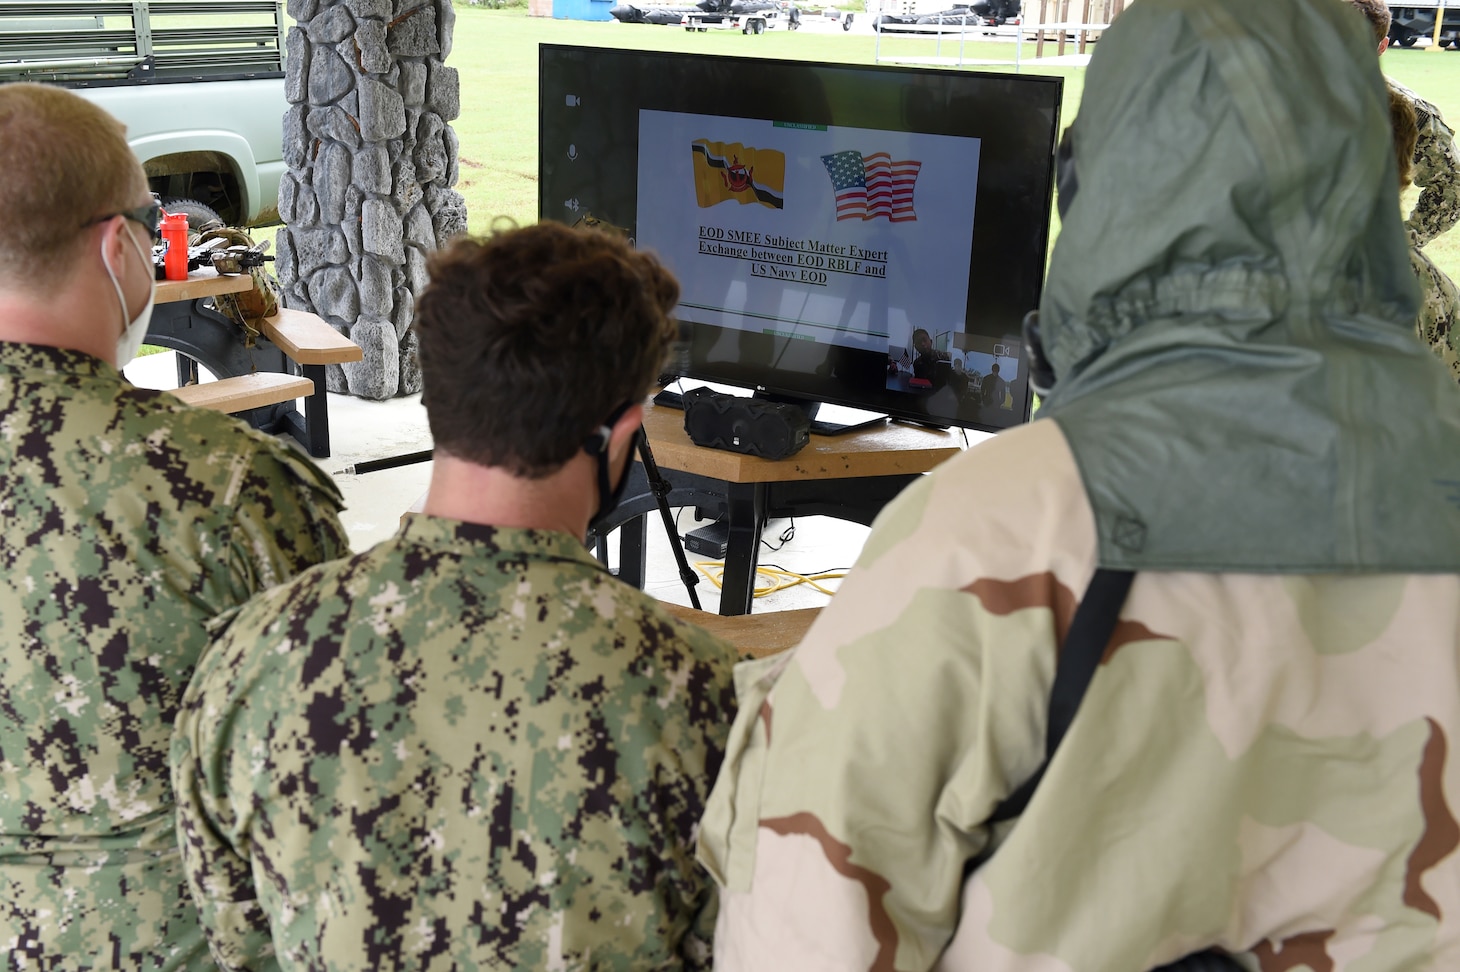 SANTA RITA, Guam (Oct. 6, 2020) Explosive Ordnance Disposal technicians assigned to the Task Group 75.1 EOD capability of Task Force 75 participate in a virtual subject matter expert exchange with troop commanders from the Royal Brunei Land Force (RBLF) during Cooperation Afloat Readiness and Training (CARAT) Brunei 2020. This year marks the 26th iteration of CARAT, a multinational exercise designed to enhance U.S. and partner navies' abilities to operate together in response to traditional and non-traditional maritime security challenges in the Indo-Pacific region. (U.S. Navy photo by Chief Mass Communication Specialist Travis Simmons)